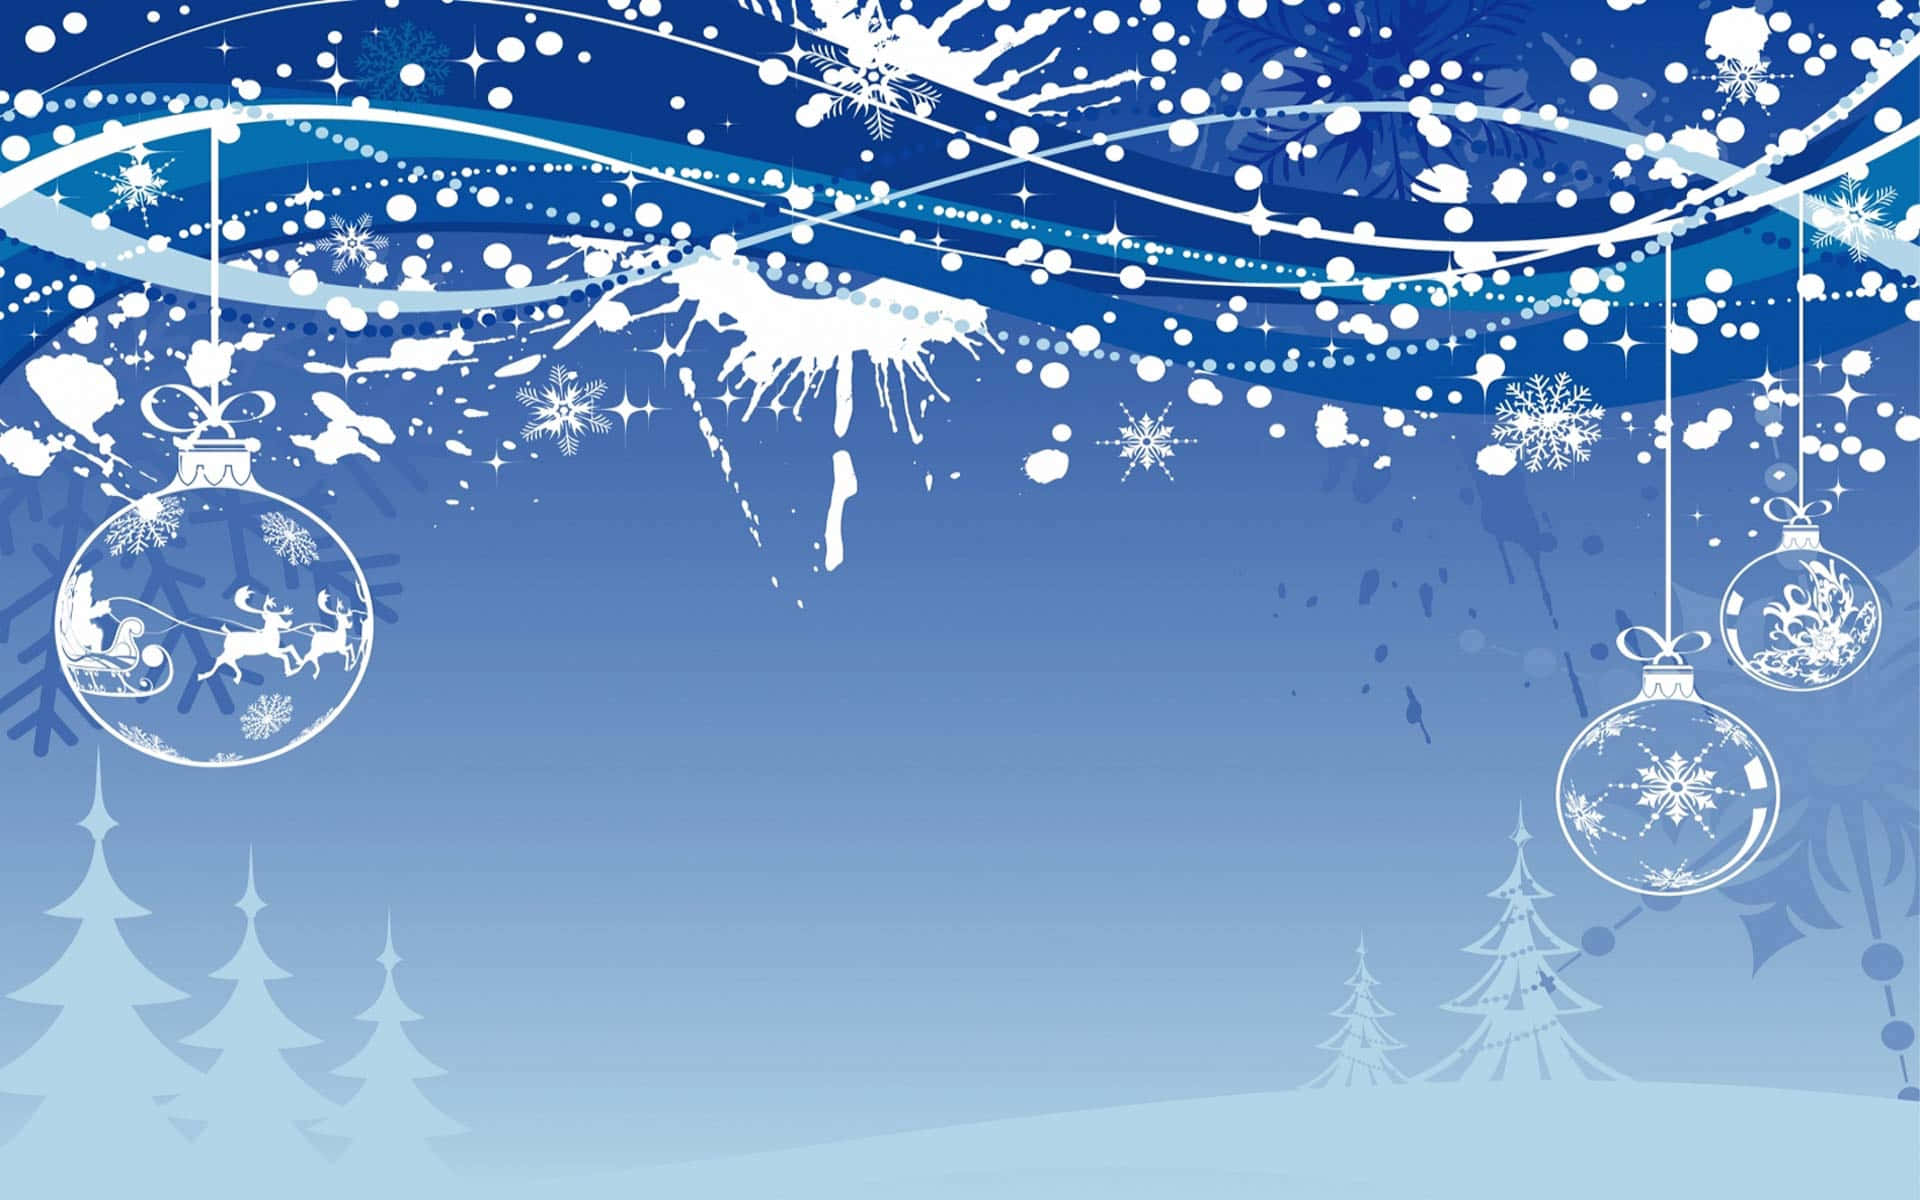 Download Winter Wonderland during the Holidays Wallpaper | Wallpapers.com